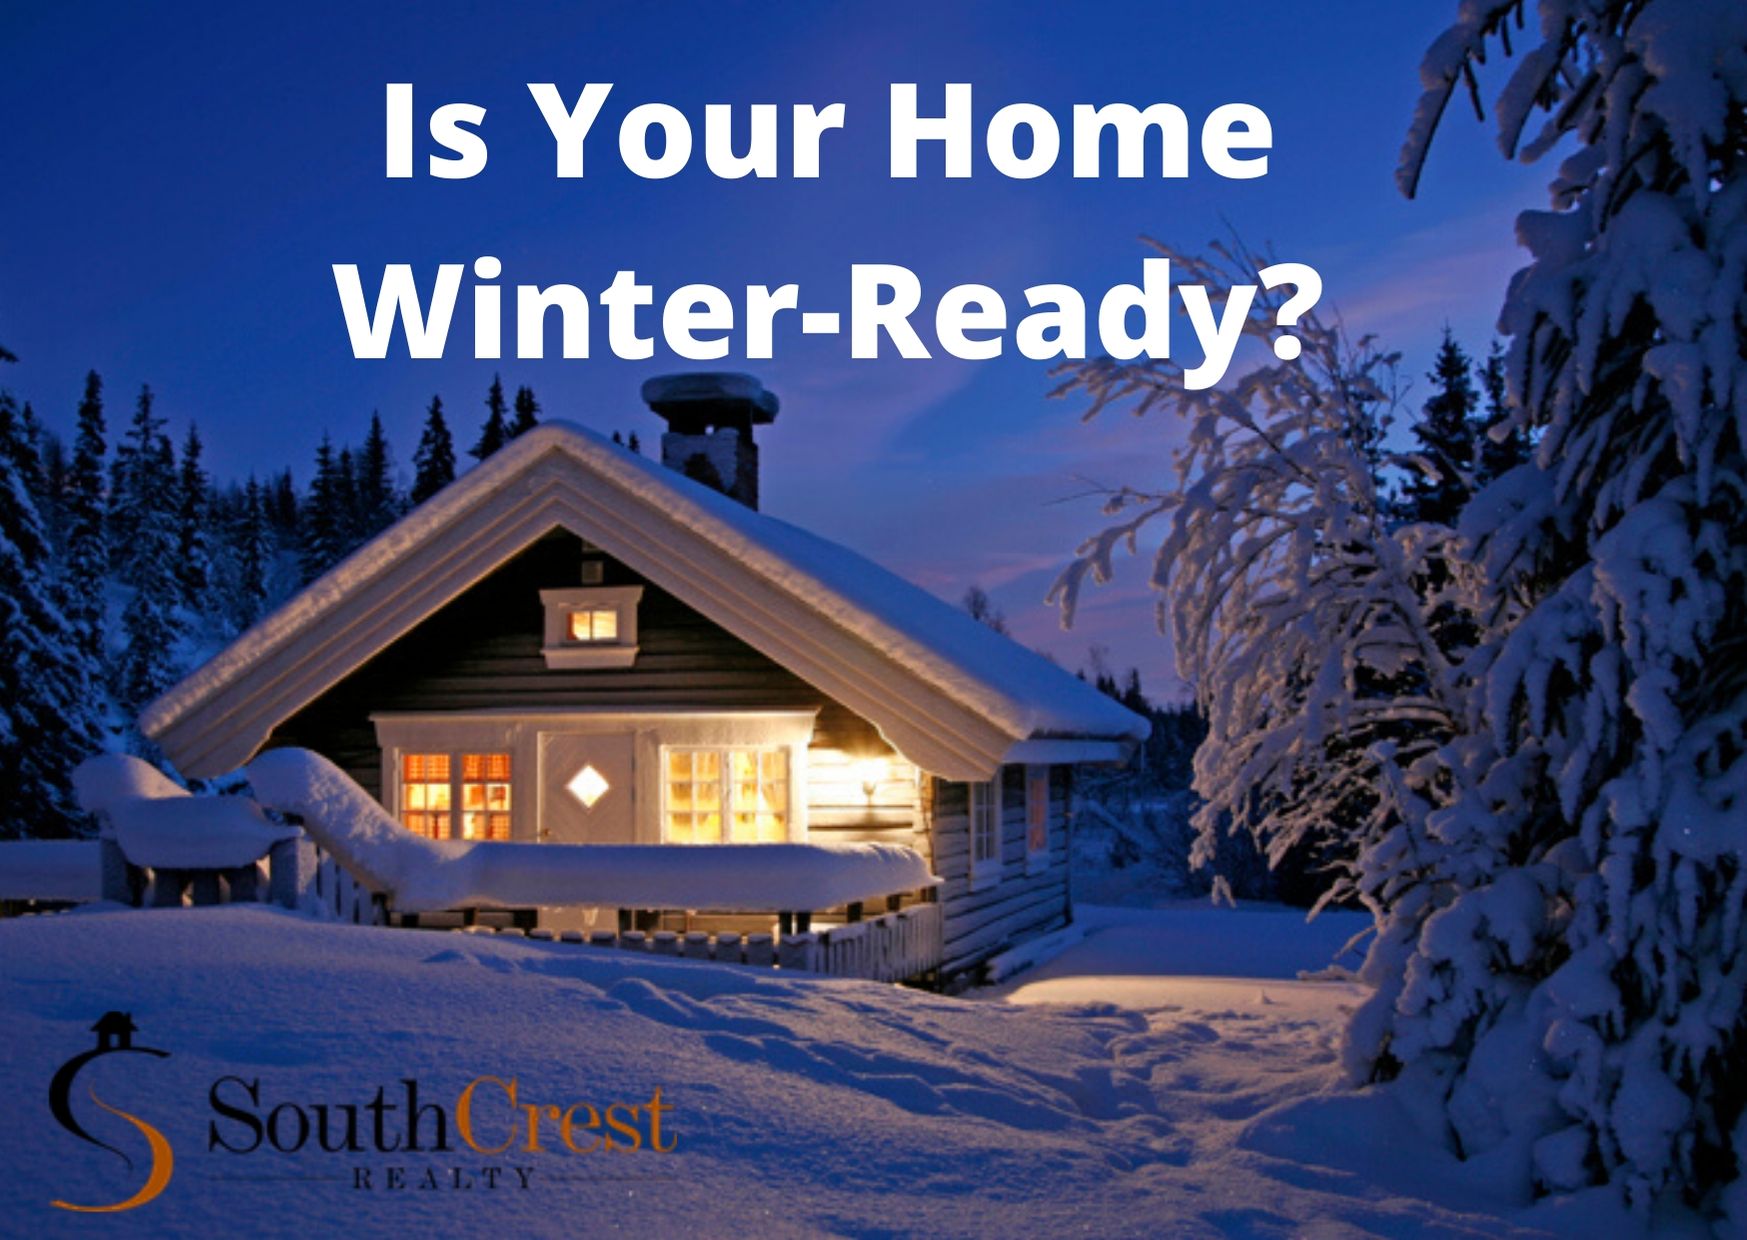 5 EASY STEPS TO A WINTER-READY HOME